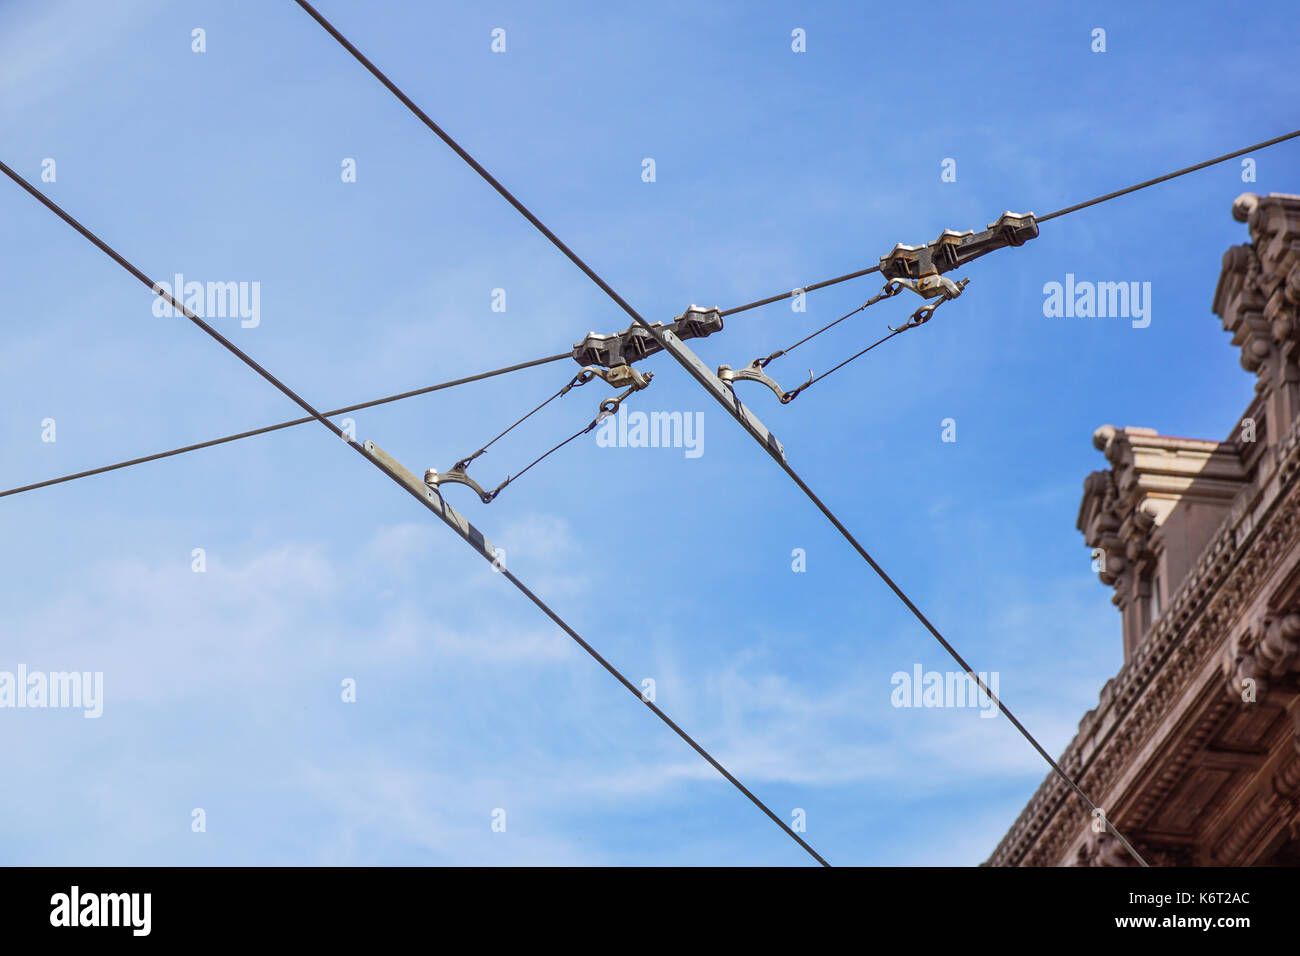 Streetcars or tram electric wires close up Stock Photo